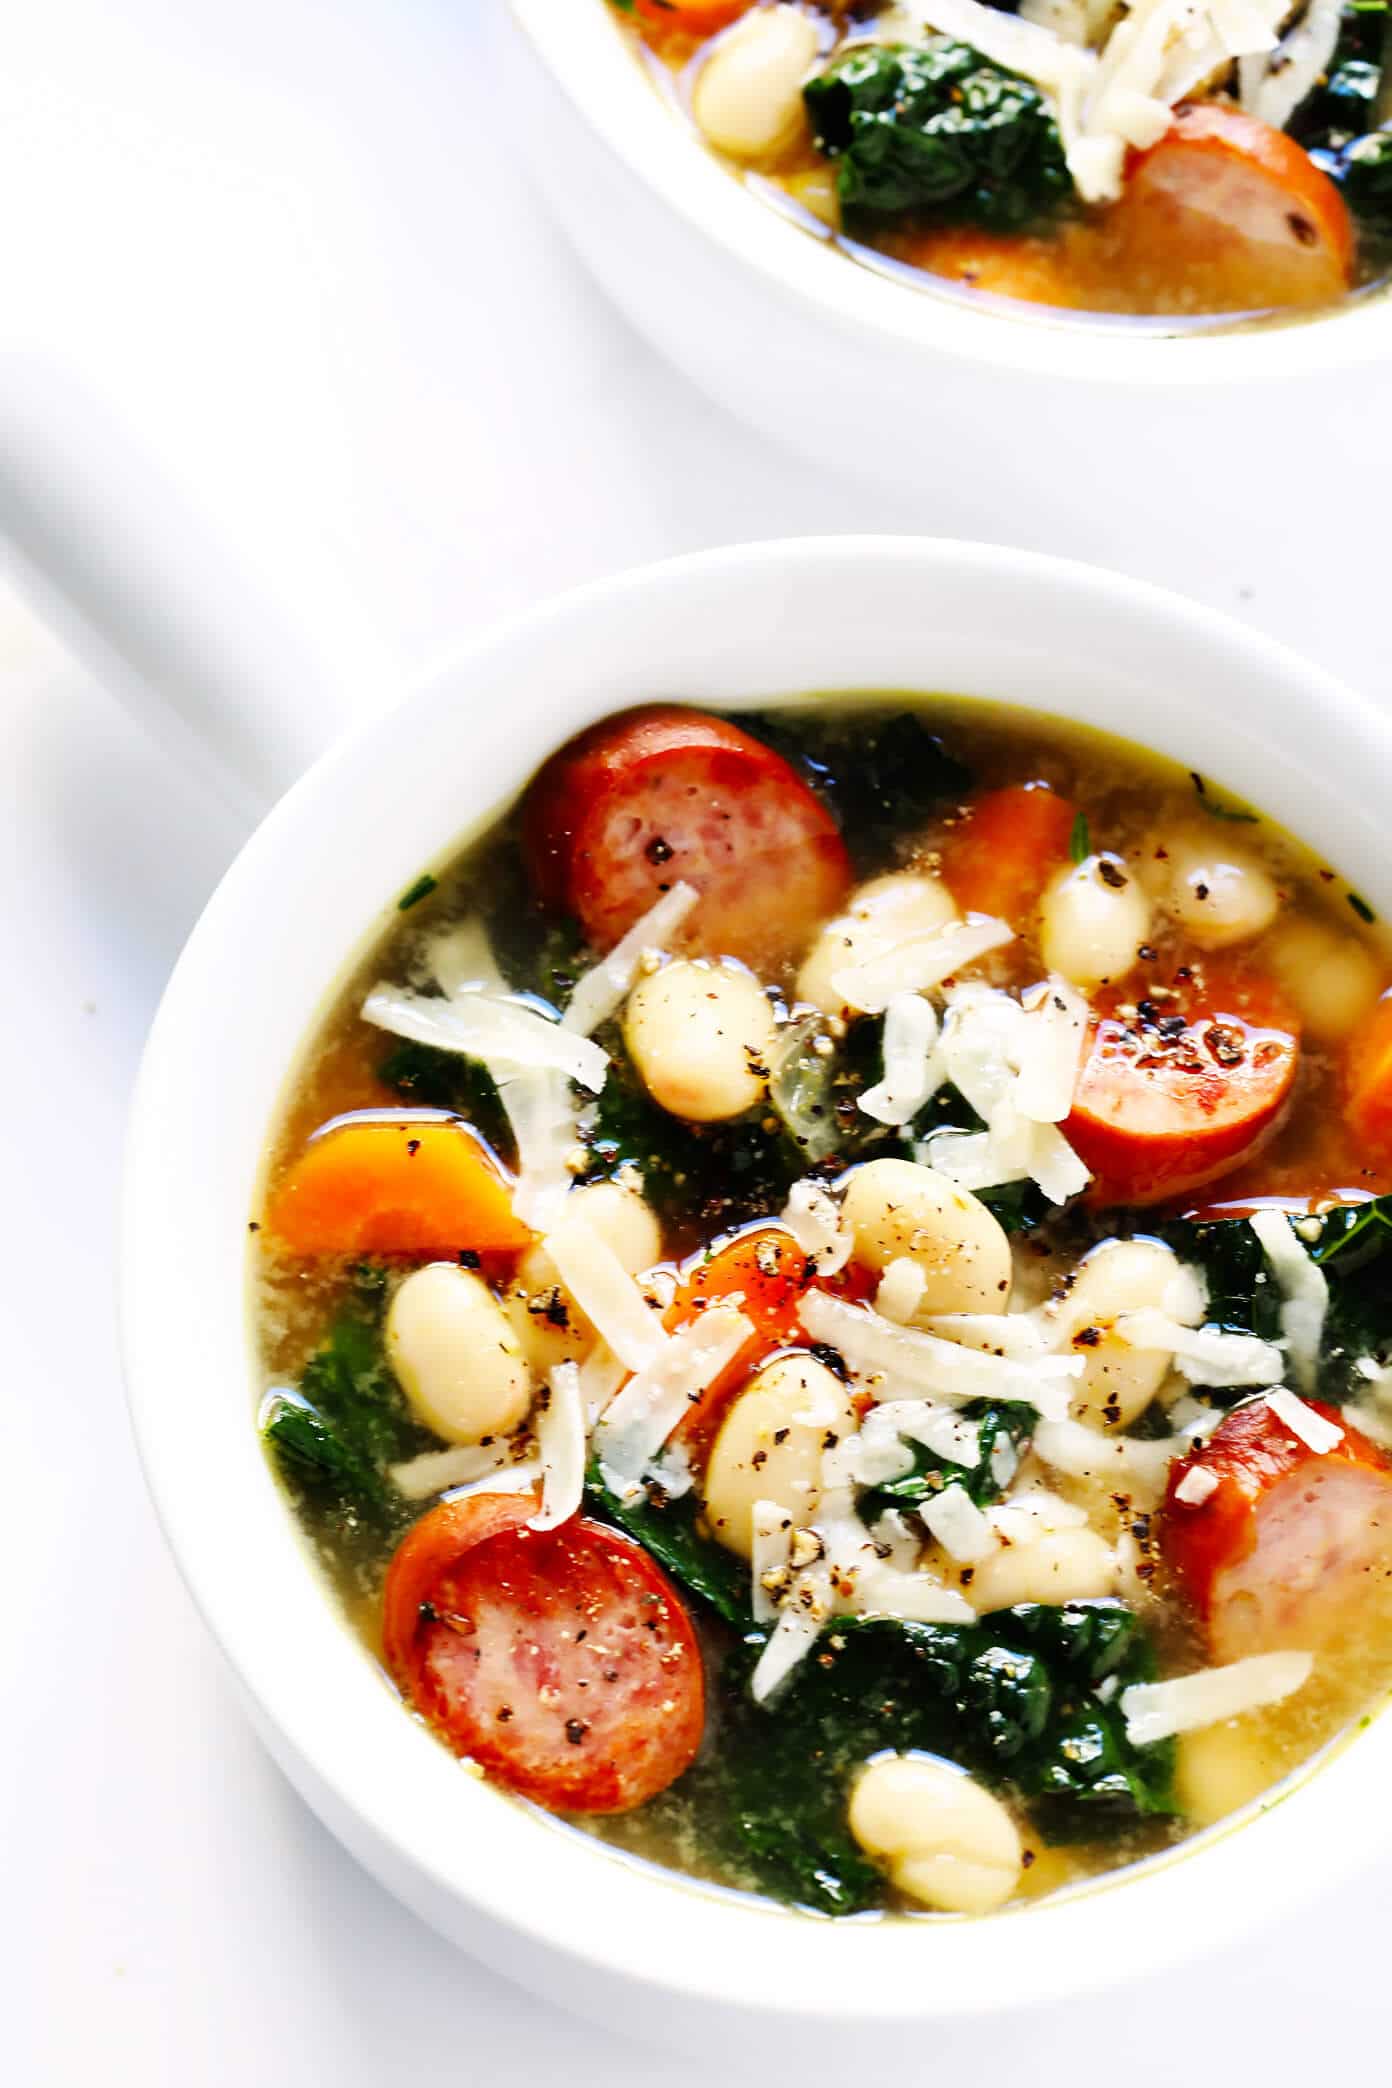 Tuscan White Bean, Sausage and Kale Soup from gimmesomeoven.com on foodiecrush.com